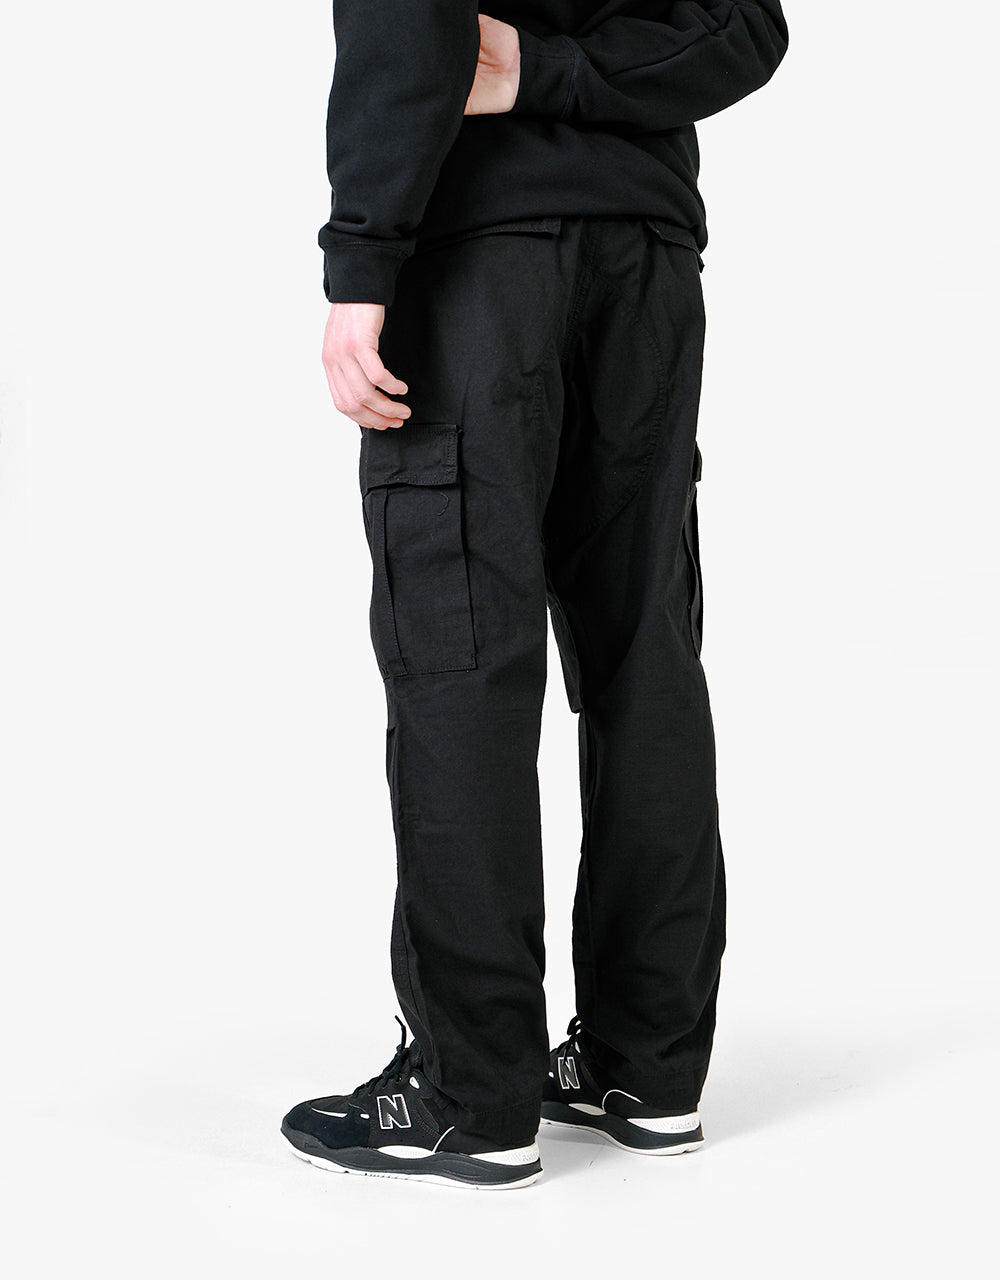 THE CARGO TROUSERS